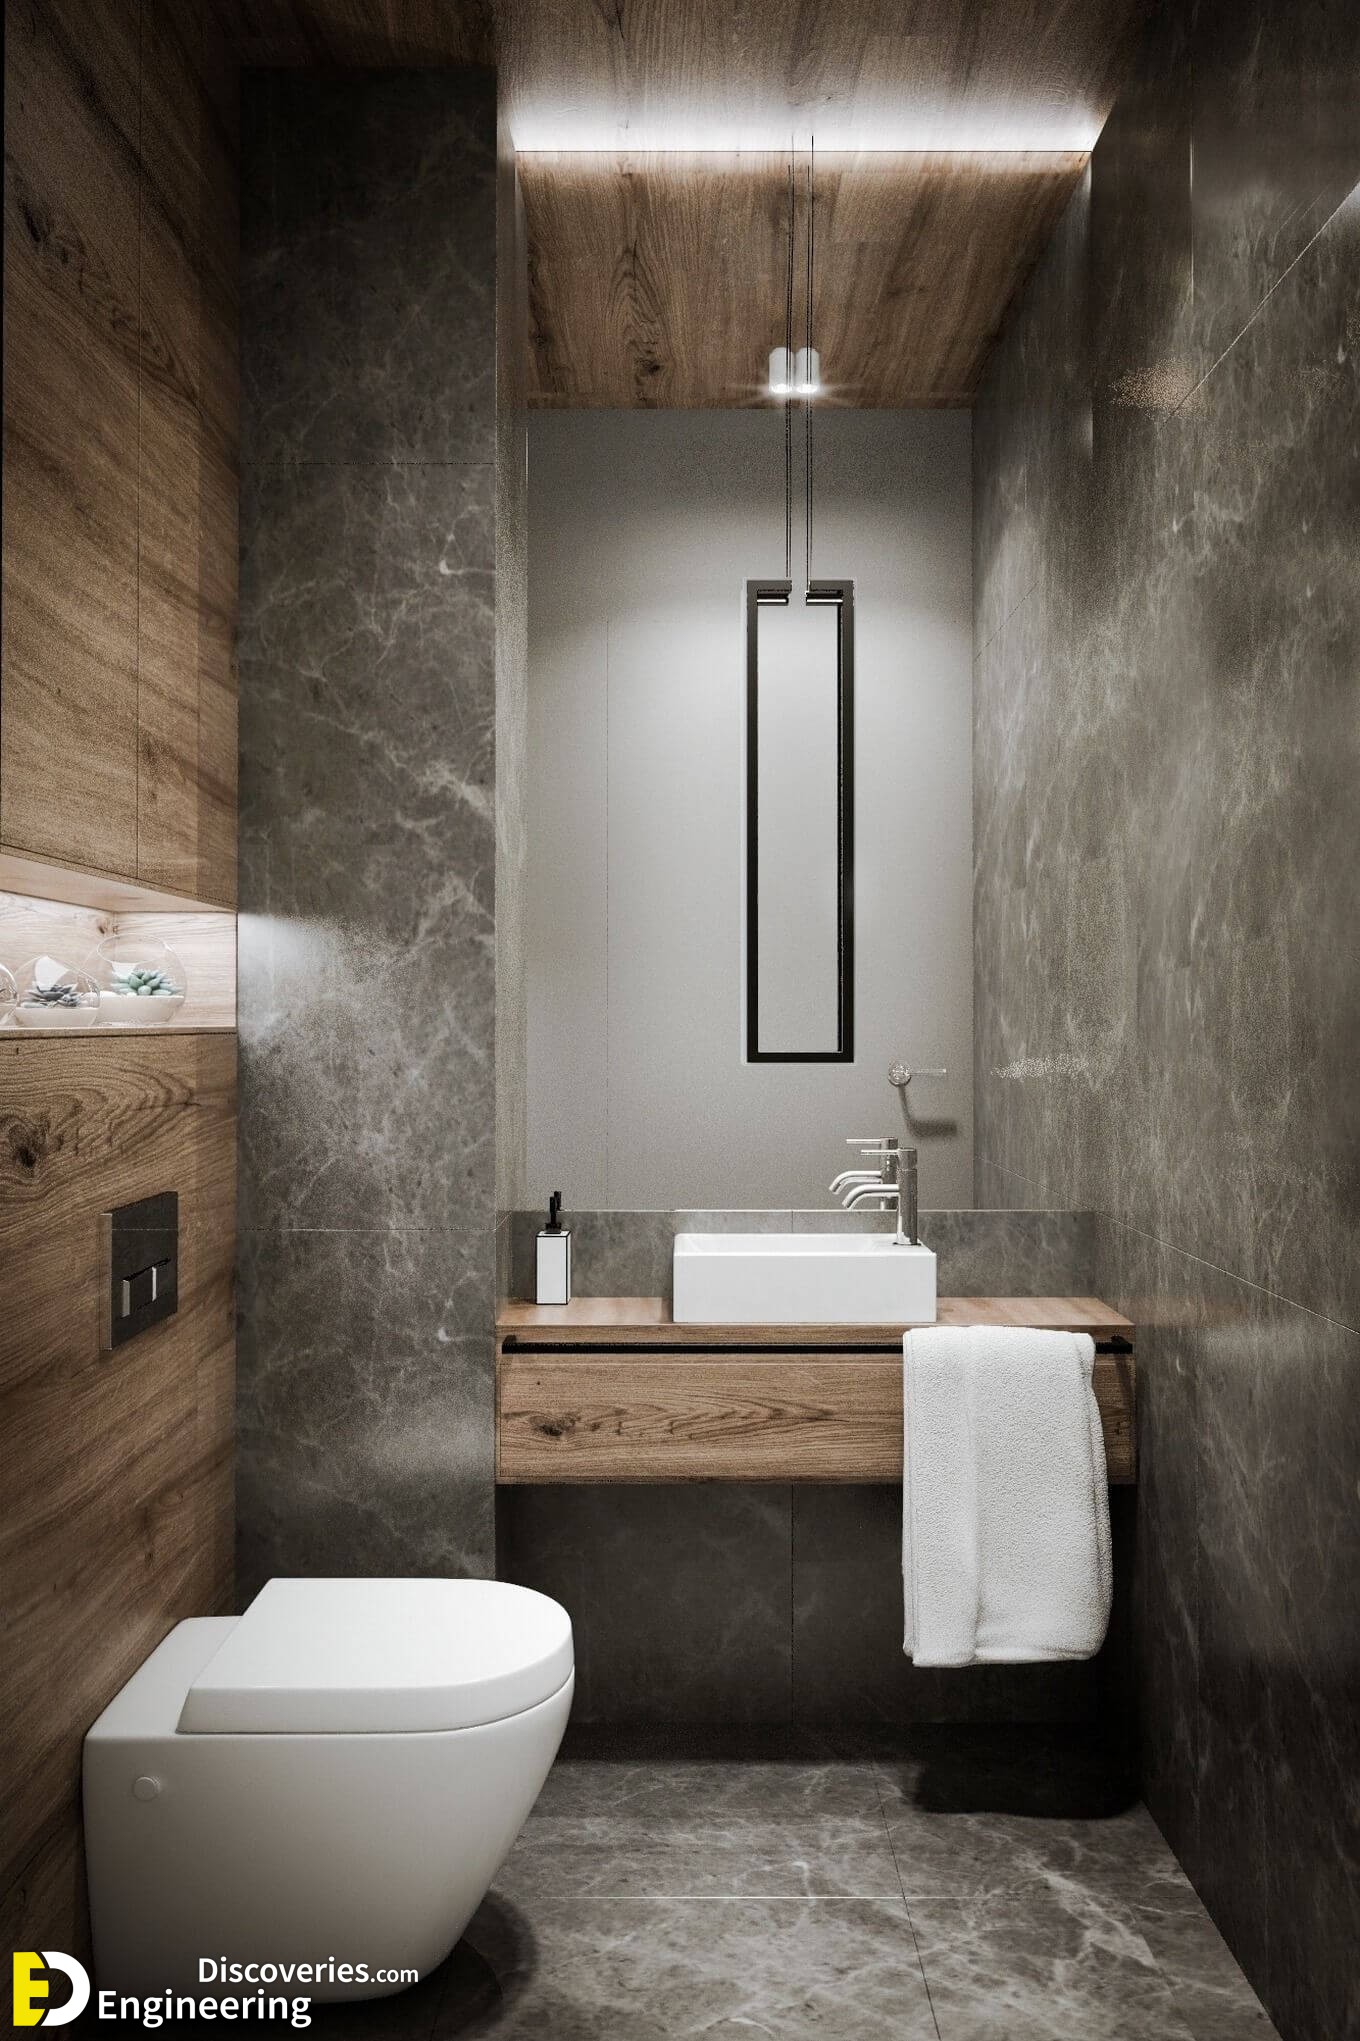 35 Amazing Toilet Design Ideas For Your Inspirations - R45yeh